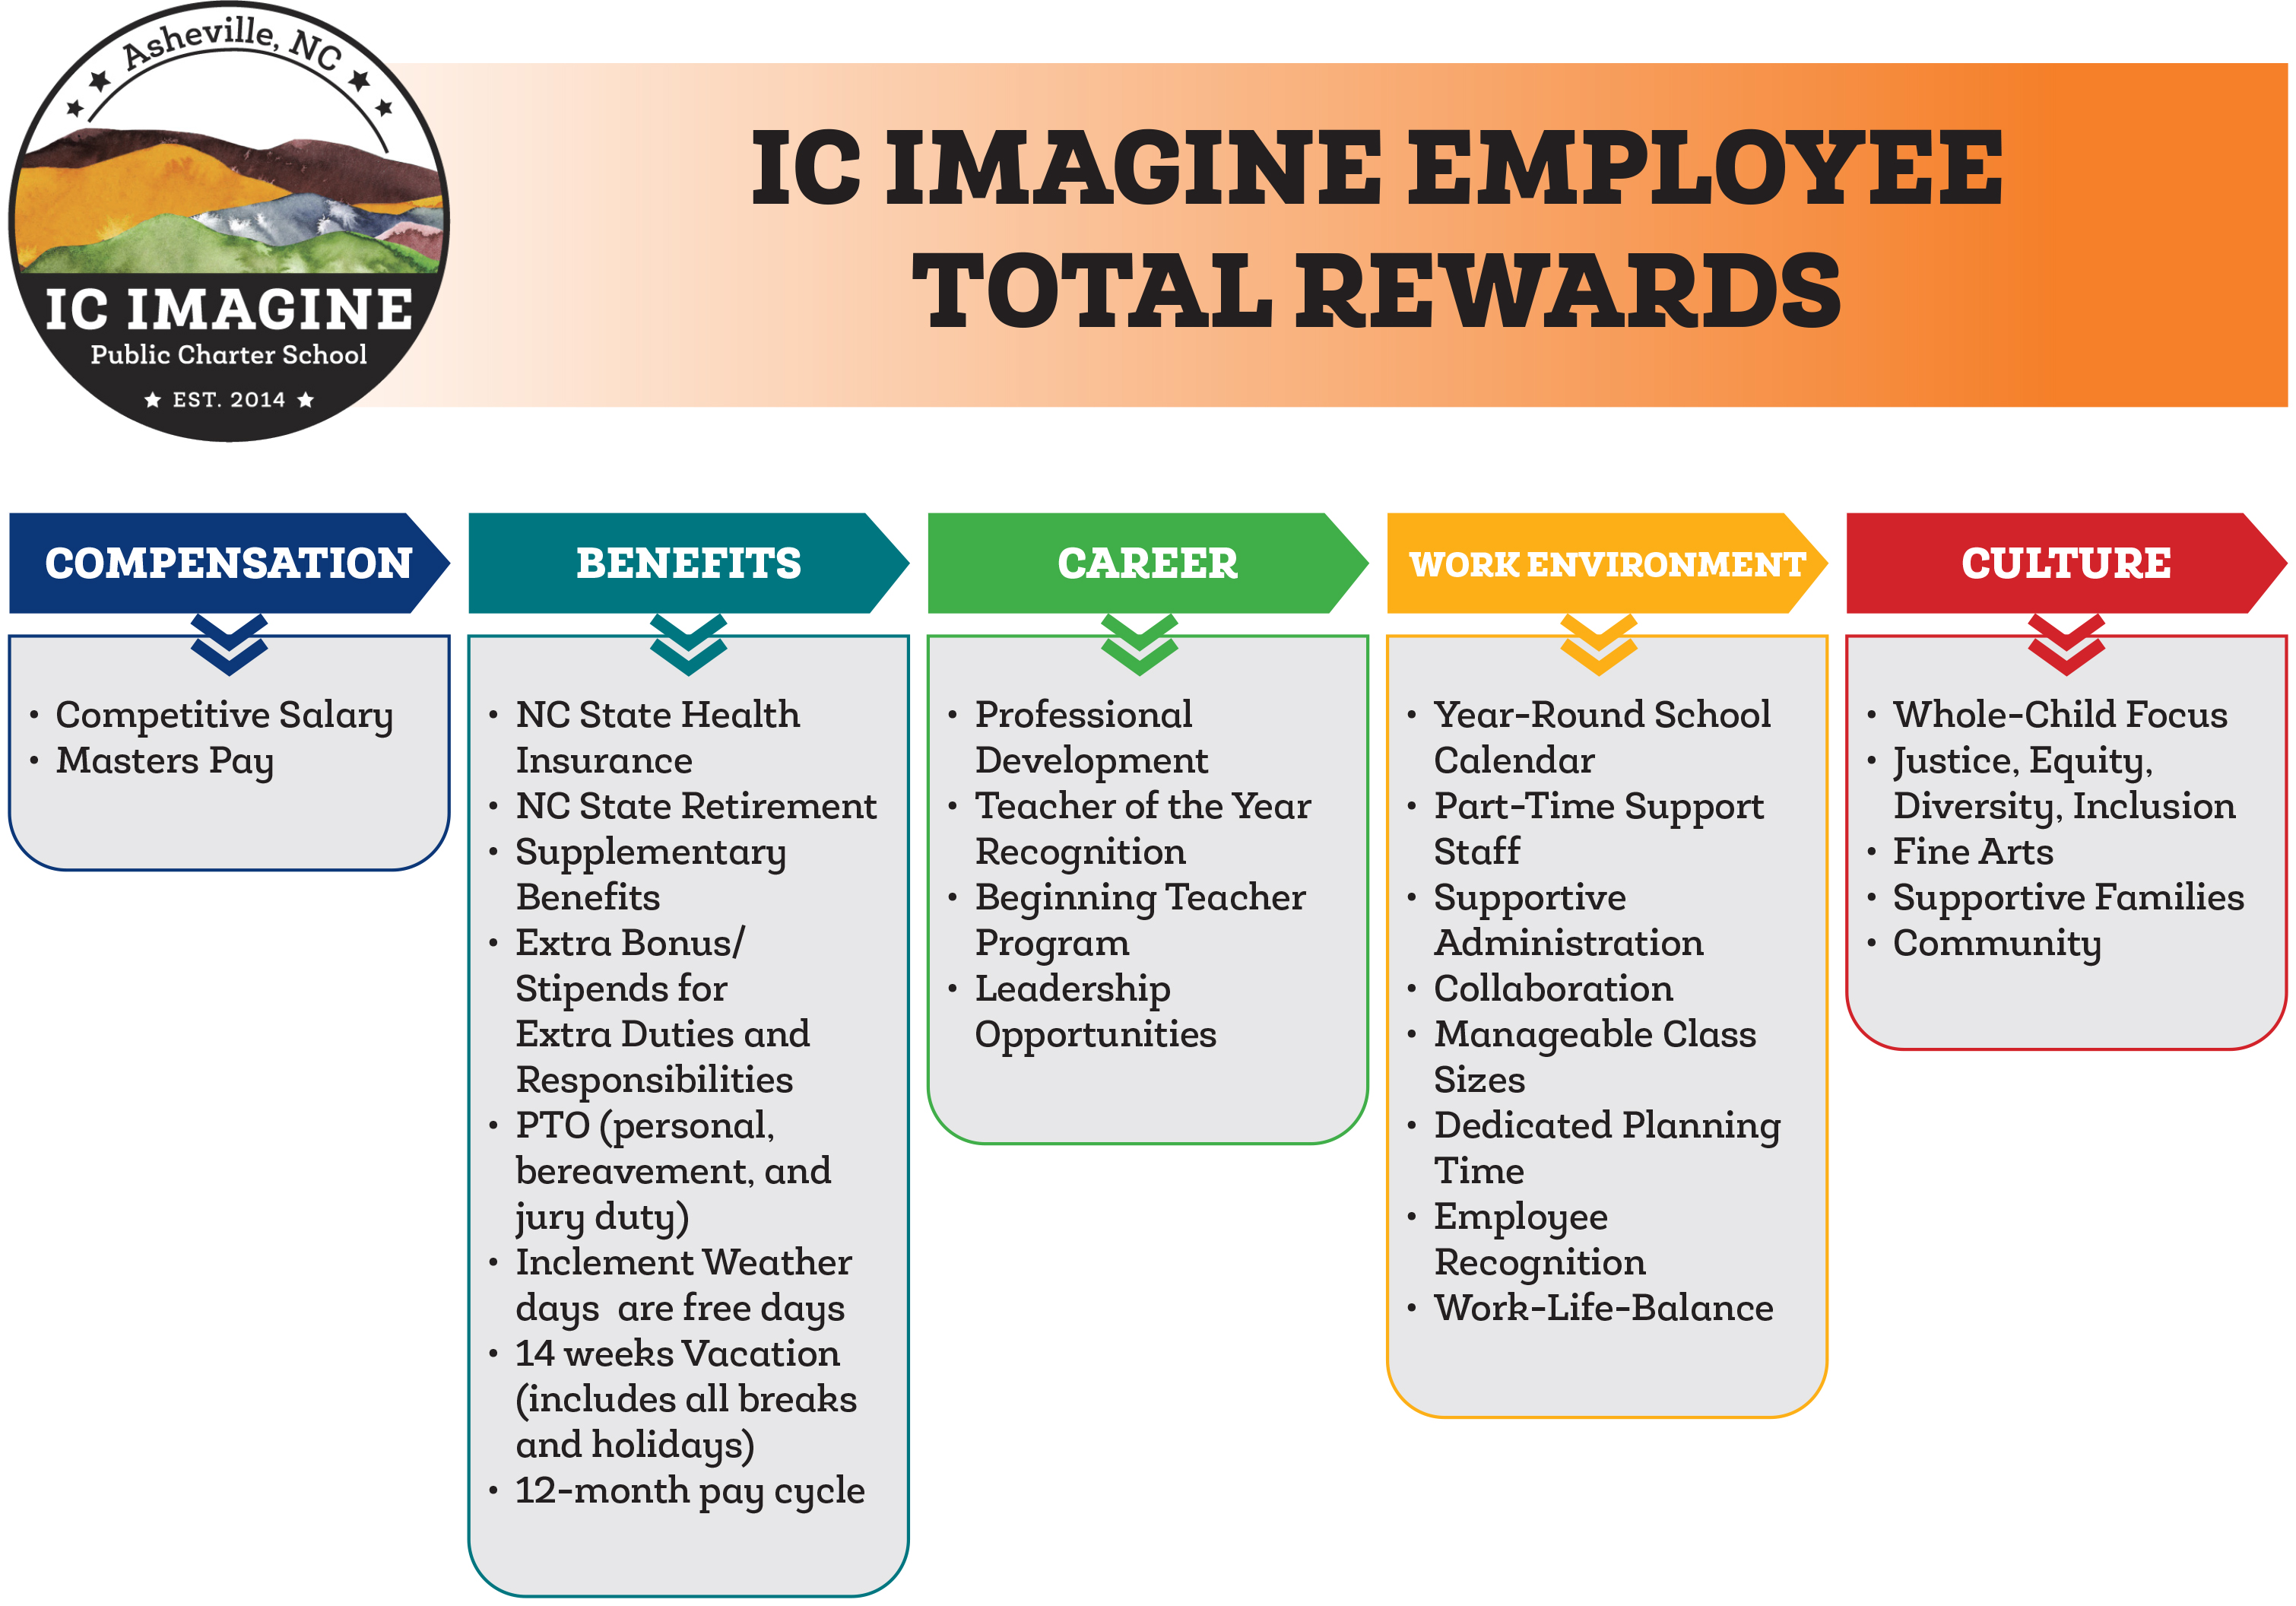 List of Reasons to work at IC Imagine